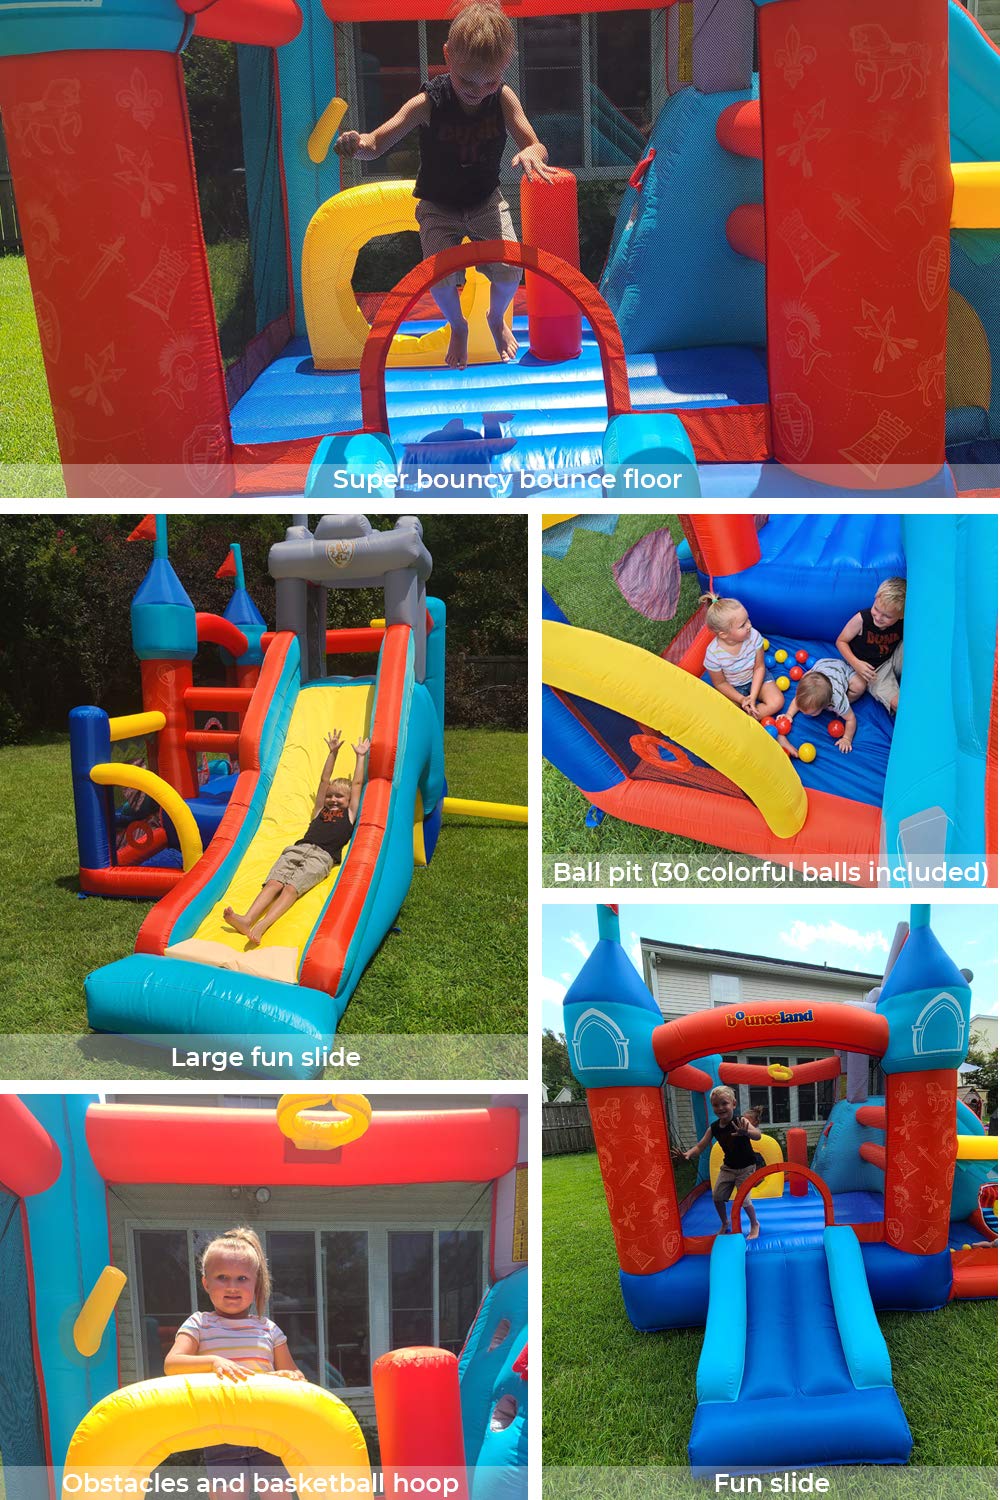 Bounceland Medieval Bounce Castle Bounce House with Slide & Ball Pit, Basketball Hoop and Ball Toss Game Included, Long Fun Slide, Obstacle Courts, Comes with UL Certified Blower Fun Party